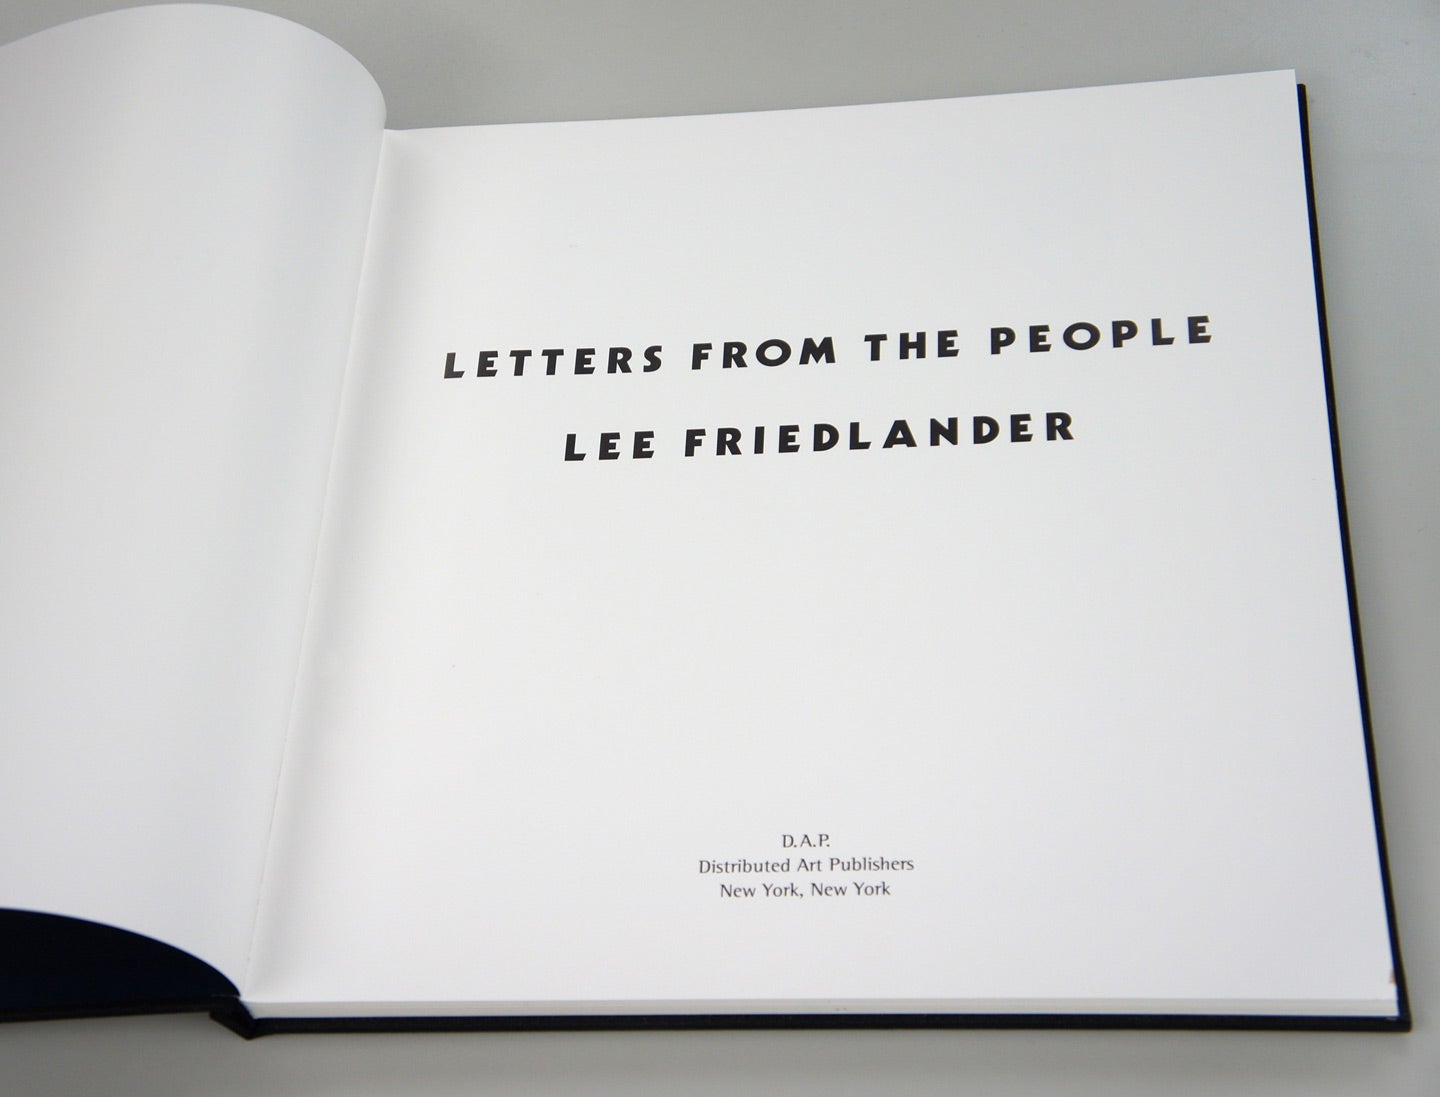 Lee Friedlander: Letters from the People (Special Limited Edition with One Vintage Gelatin Silver Print: "E")